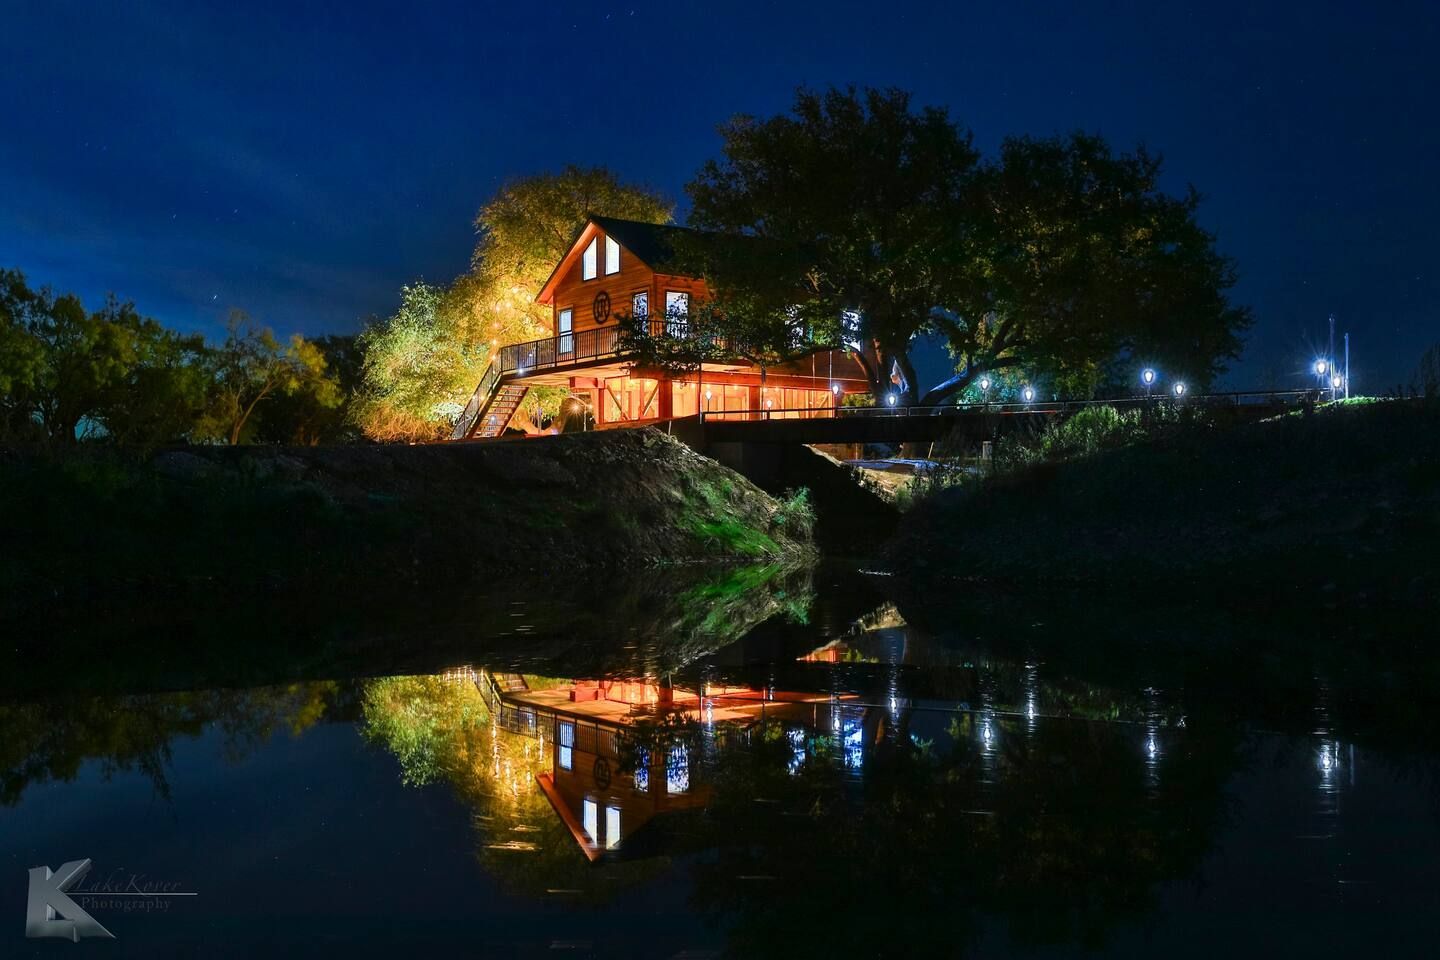 The Magic Tree House rental property in Baird Texas is lit up at night with trees in the background . The Best Texas Ranch Rentals. 